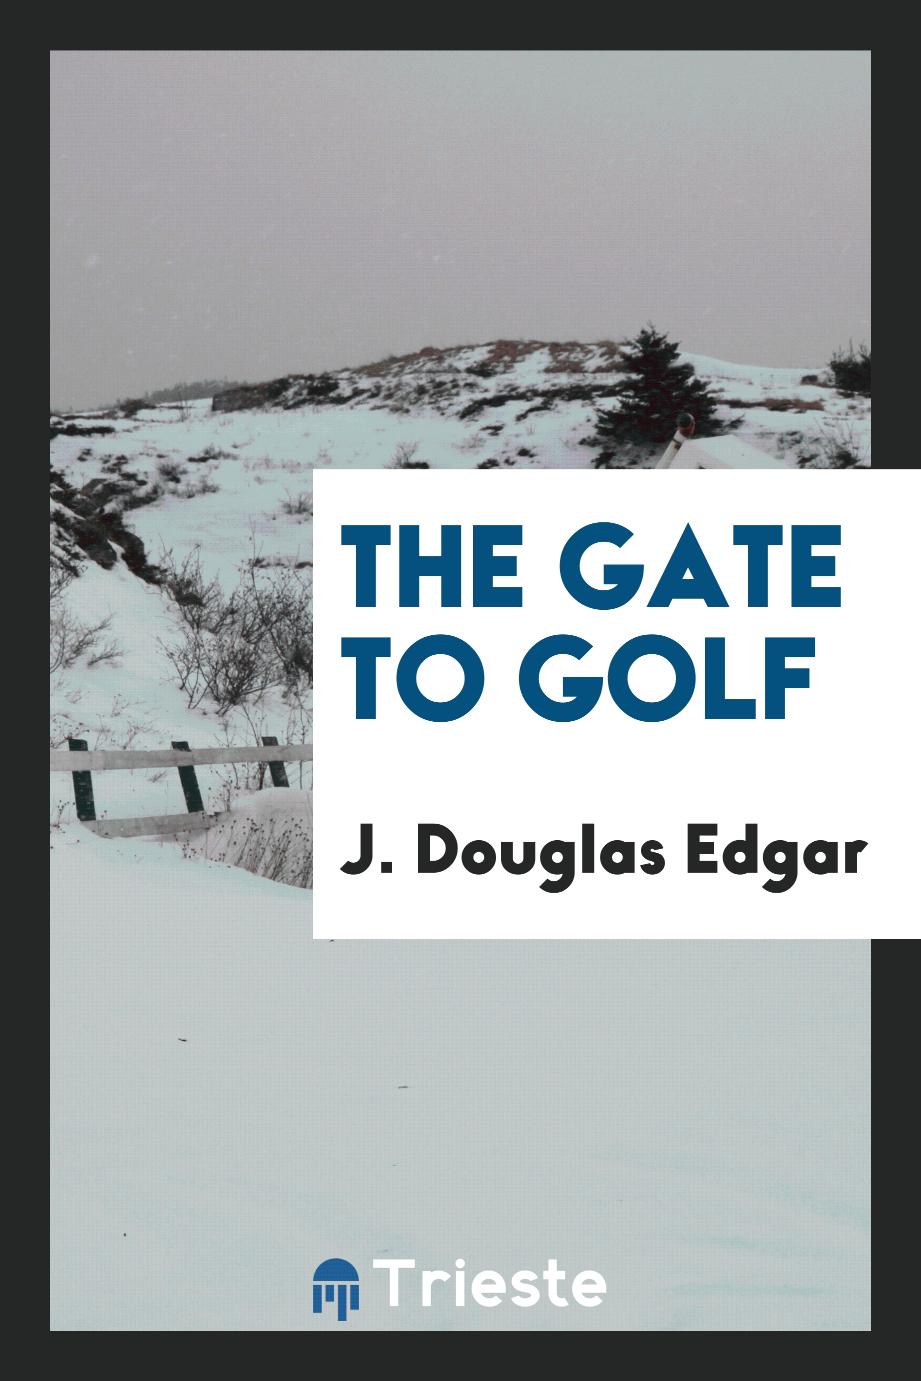 The Gate to Golf